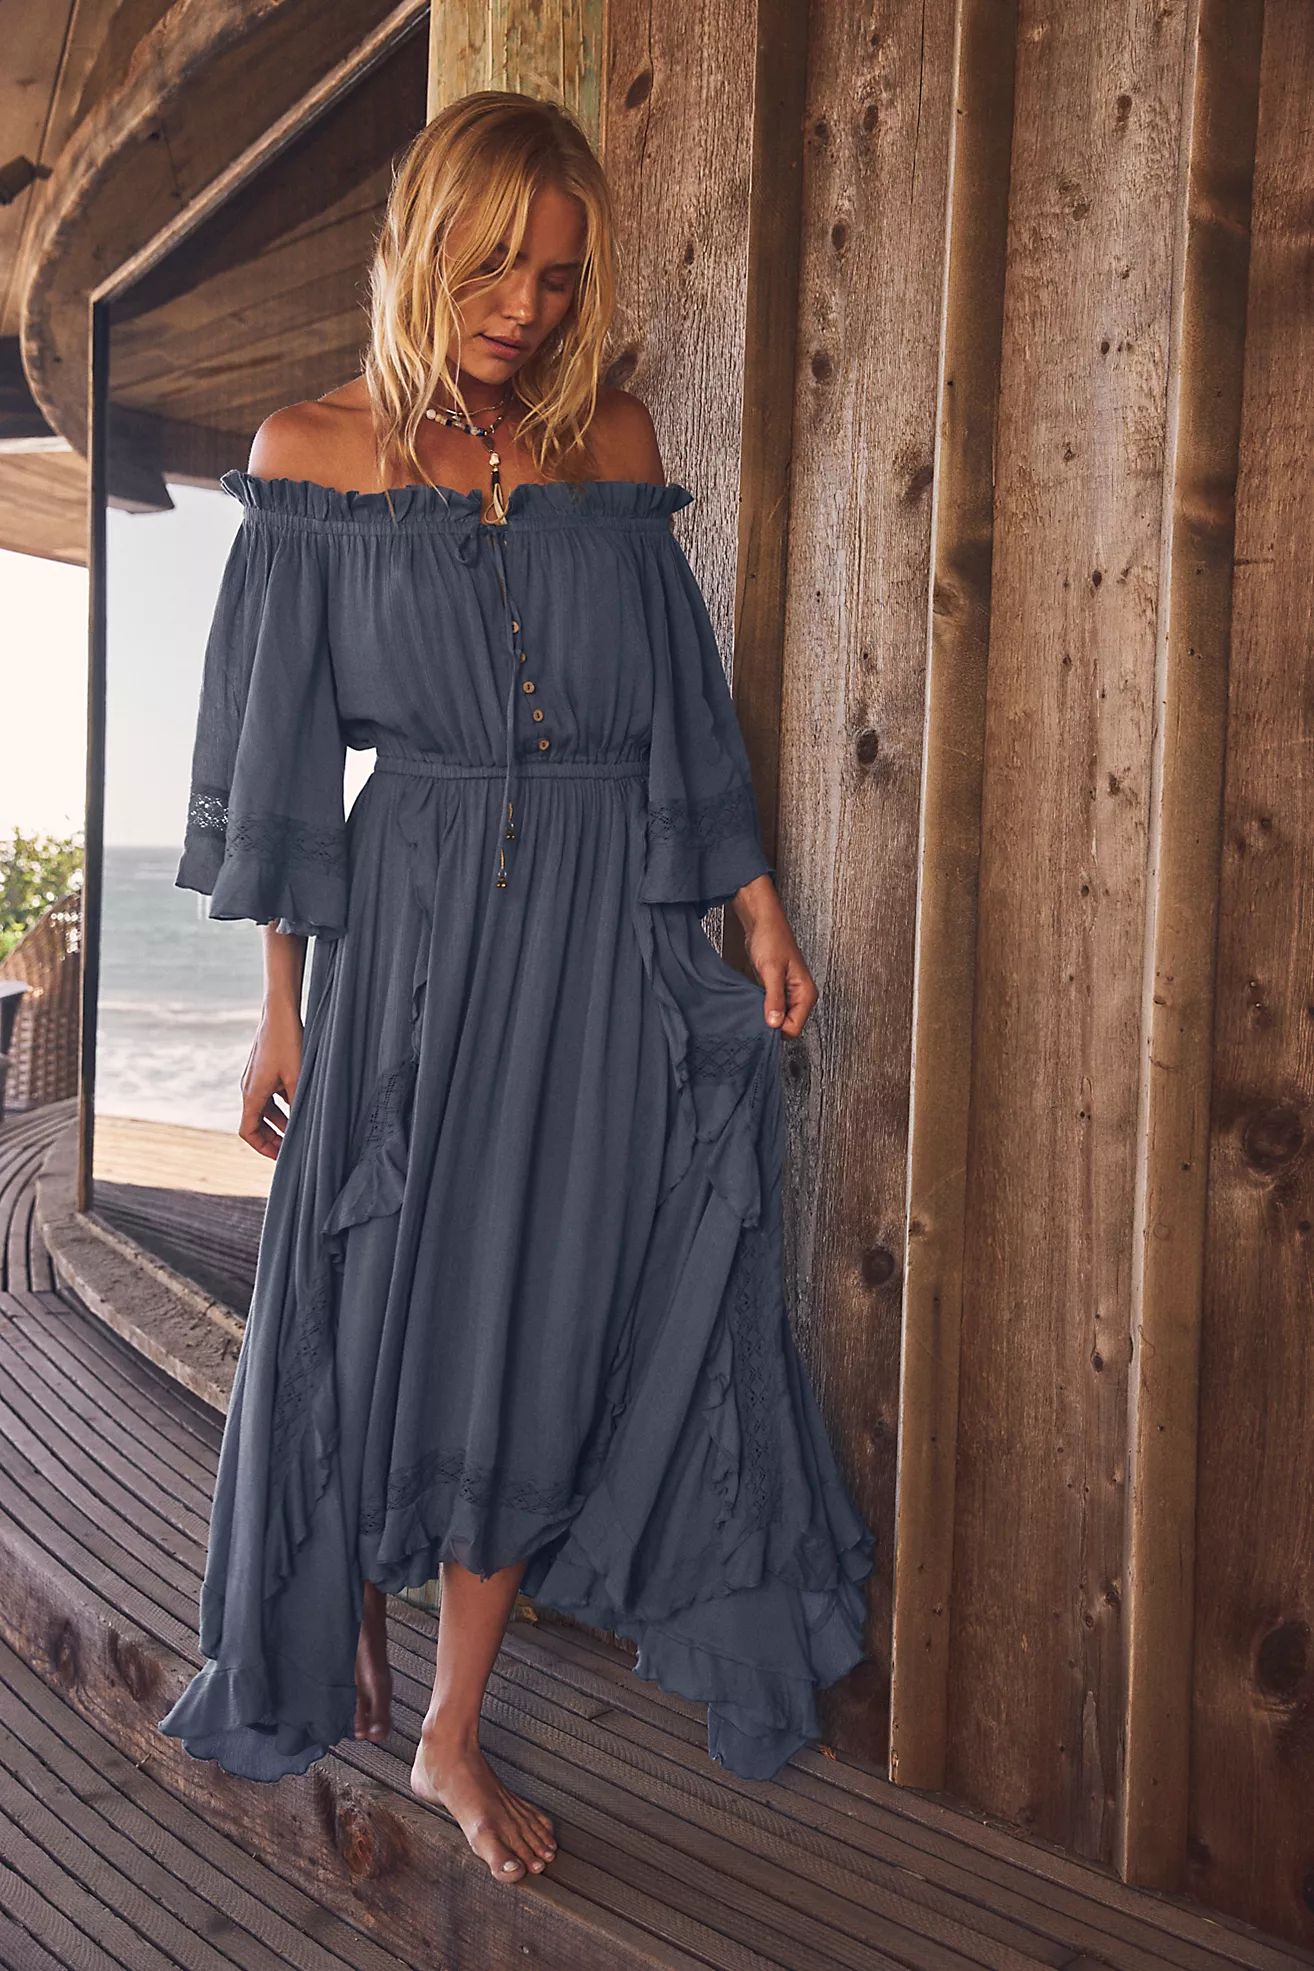 Beach Bliss Maxi Dress | Free People (Global - UK&FR Excluded)